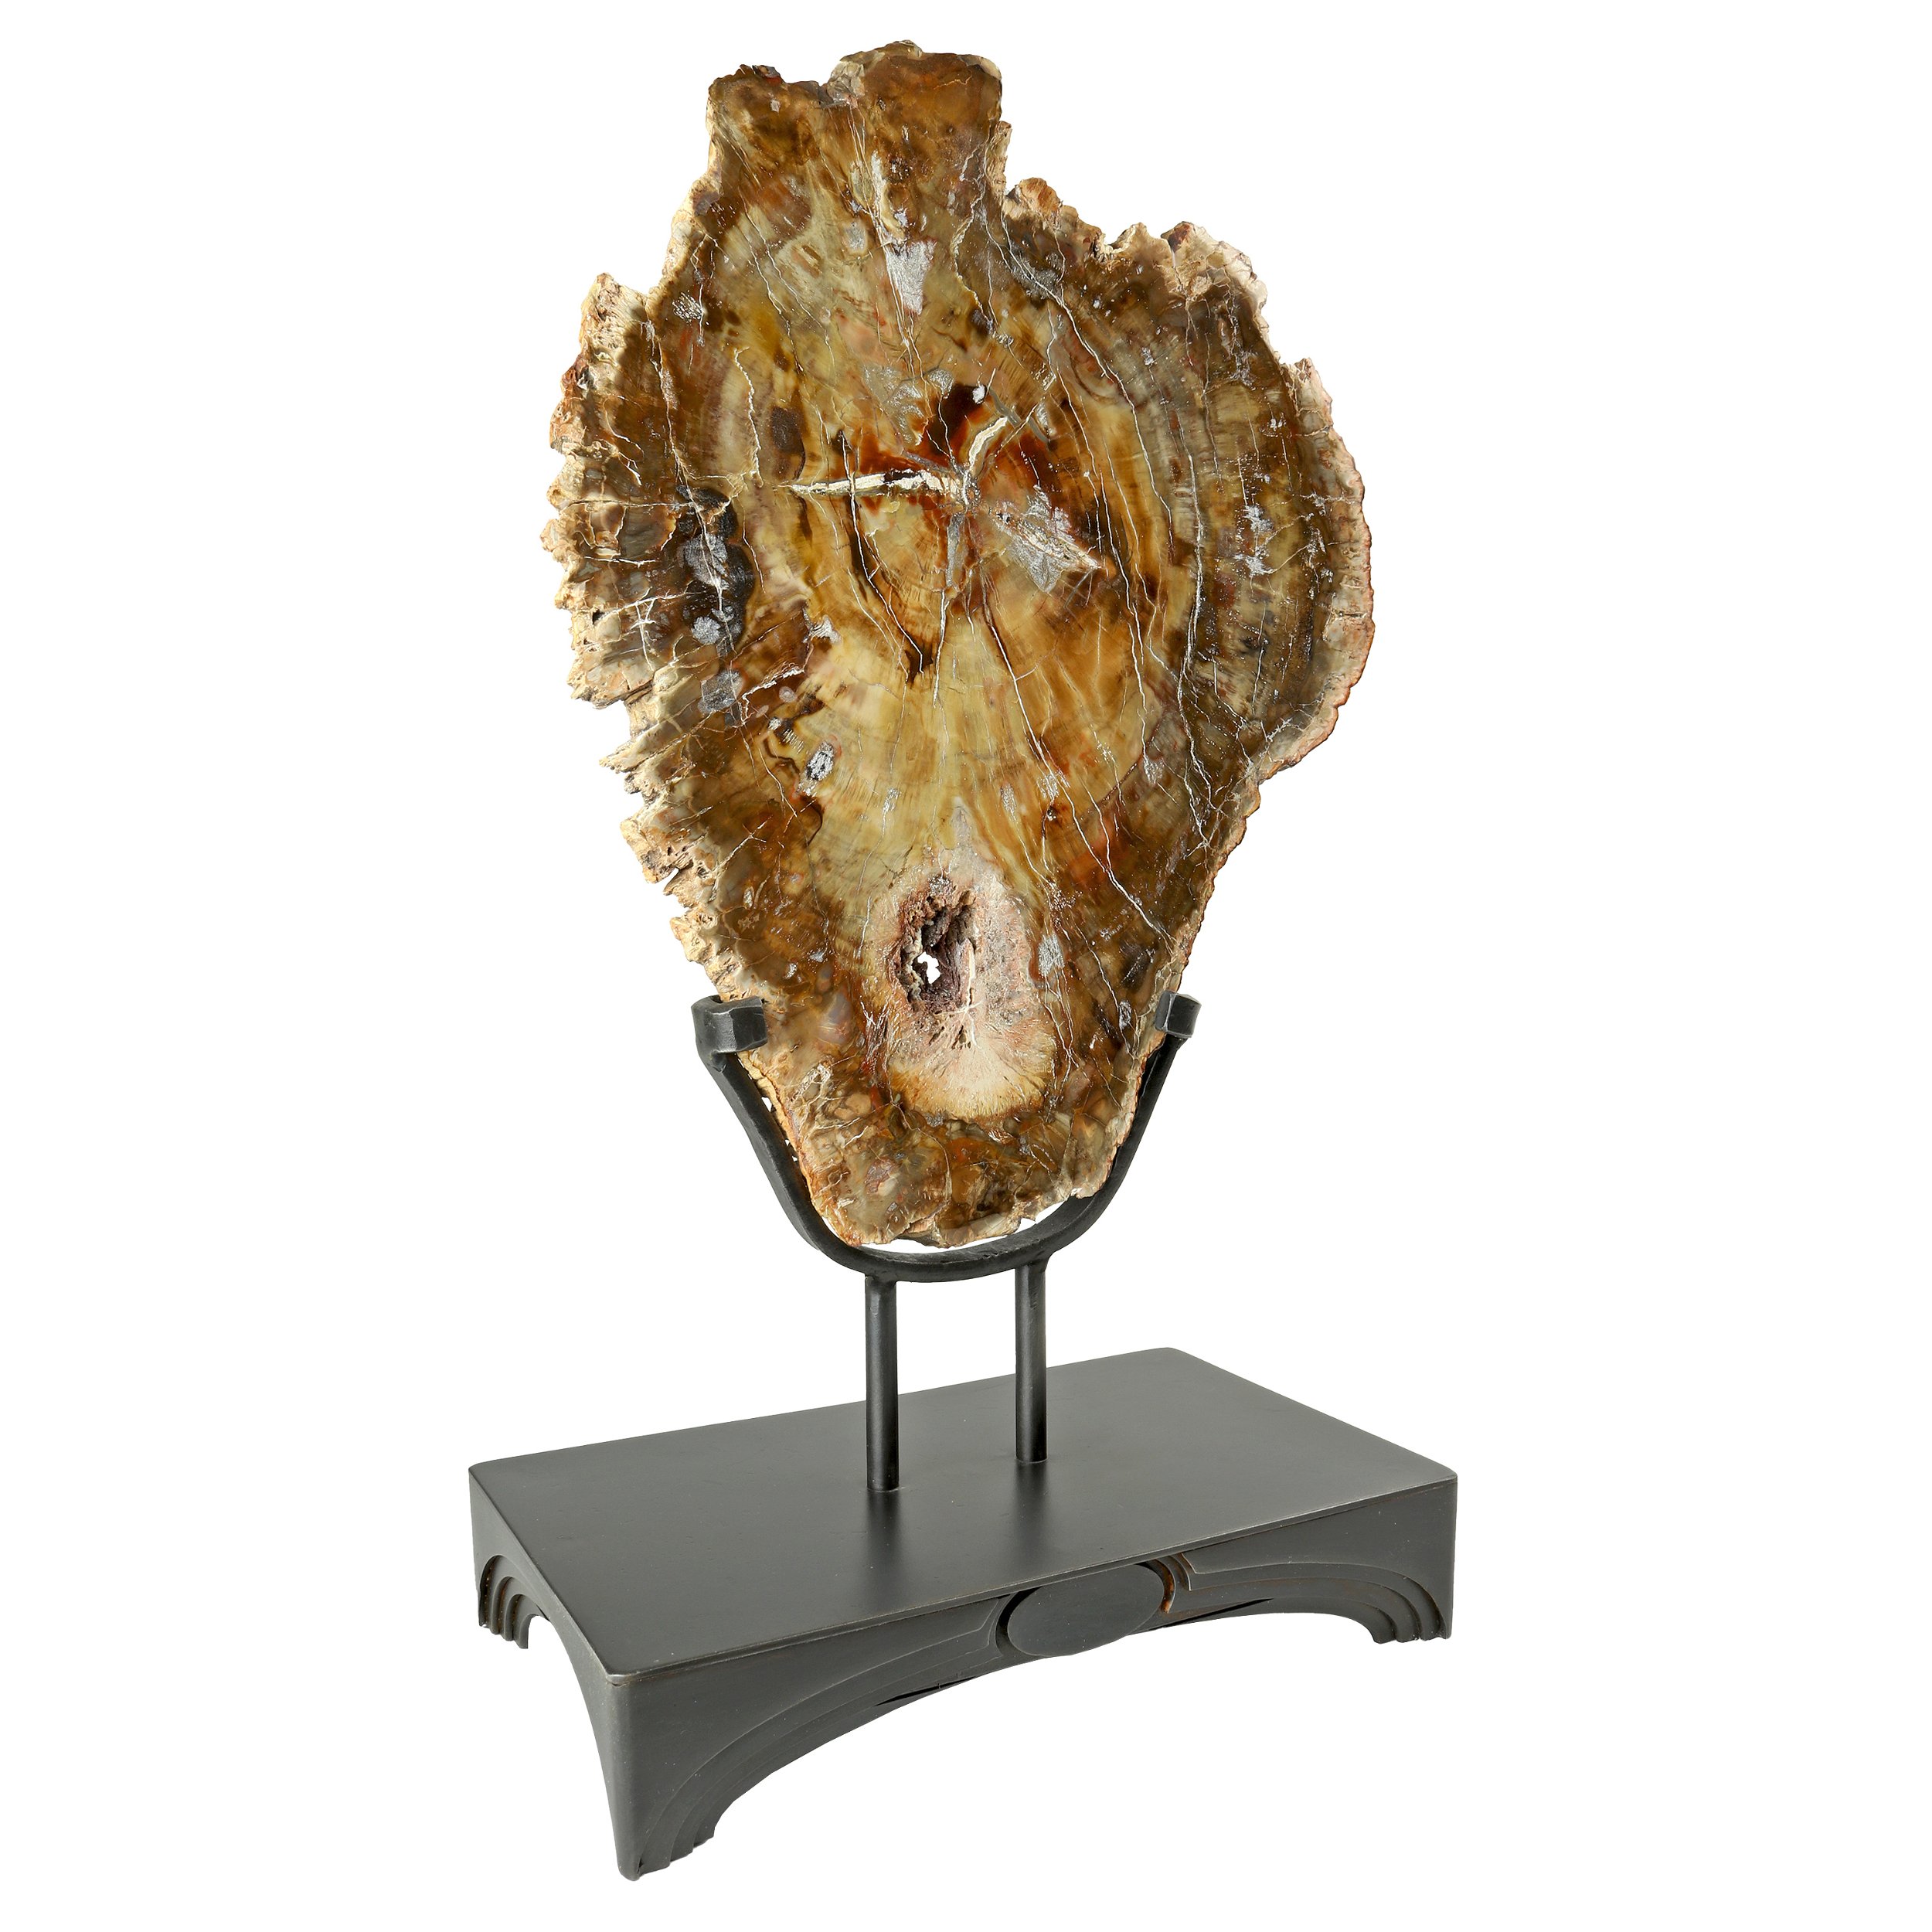 Madagascar Petrified Wood Slice In Custom Stand - Reverse Pear Shape With Chestnut Colored Druze Pocket In Lower Center